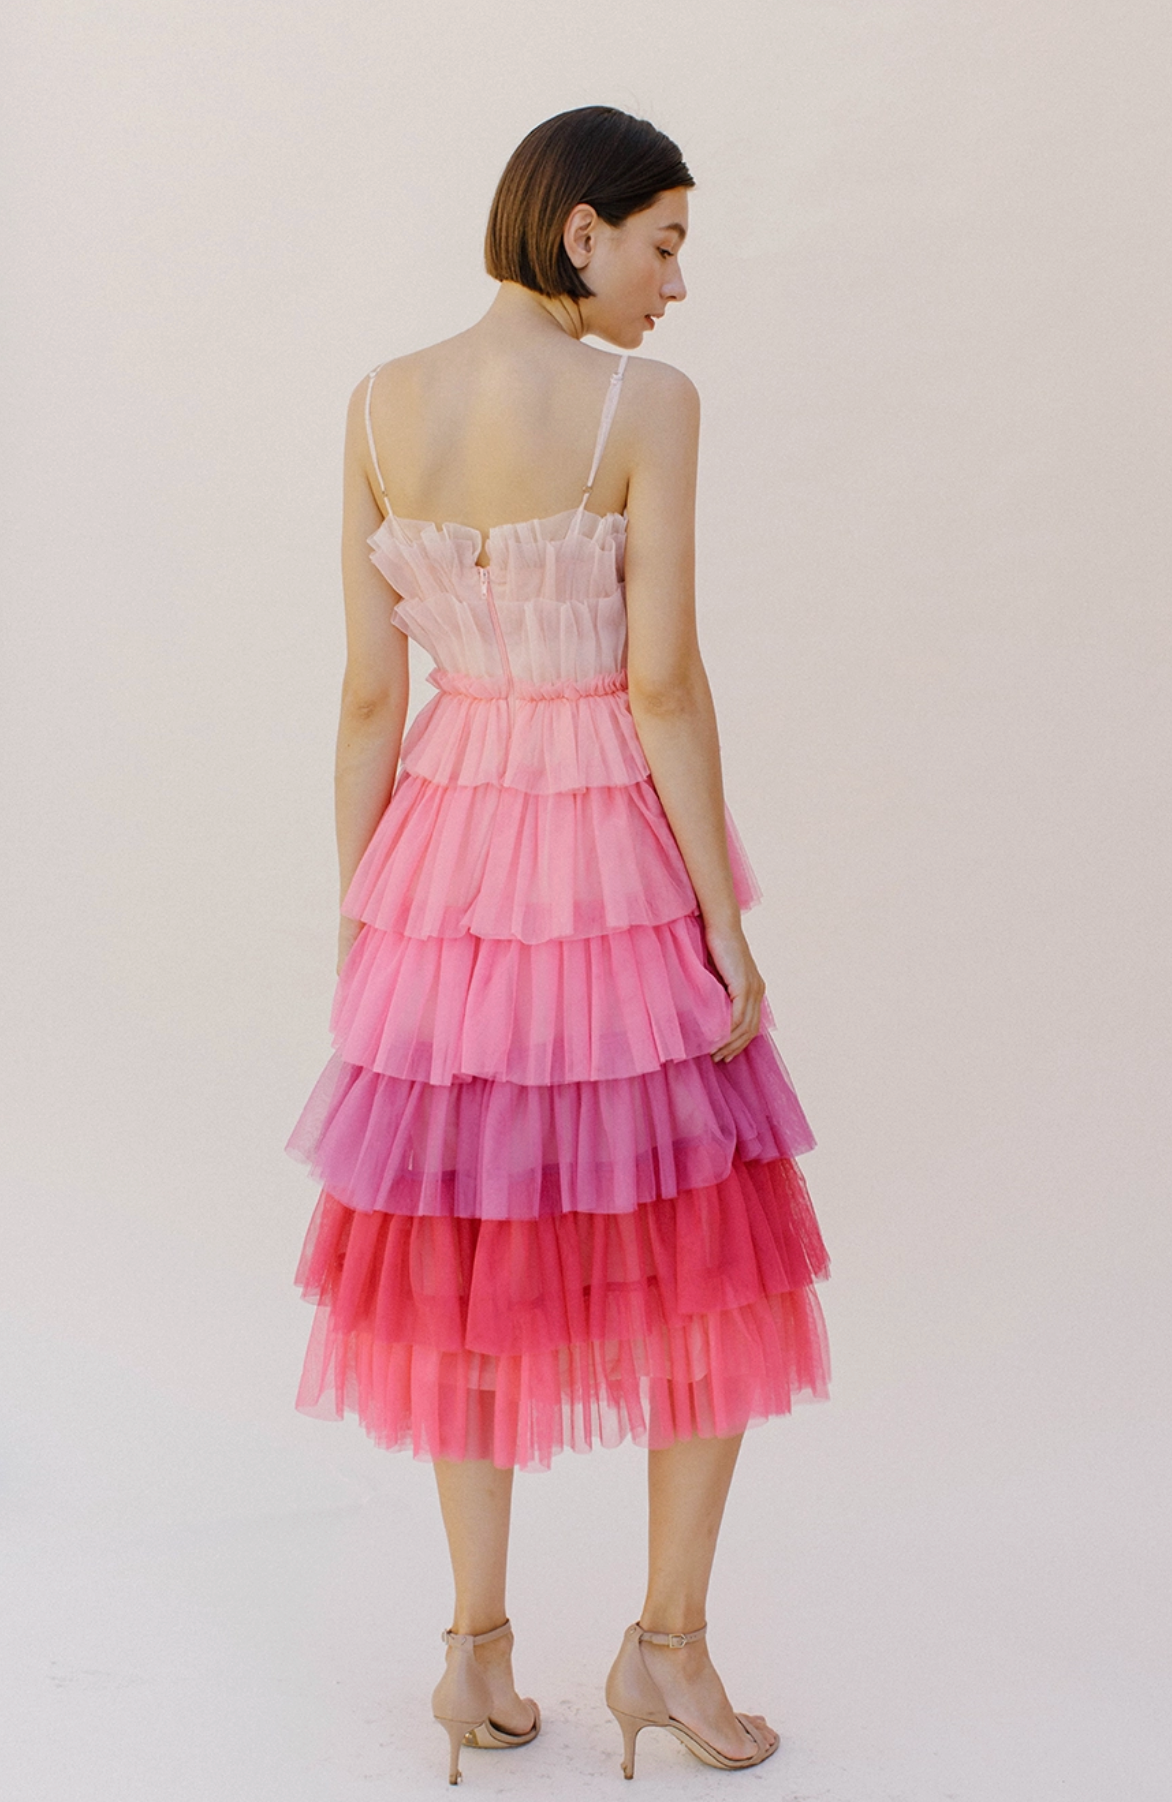 Storia-Pink Tiered Tulle Dress